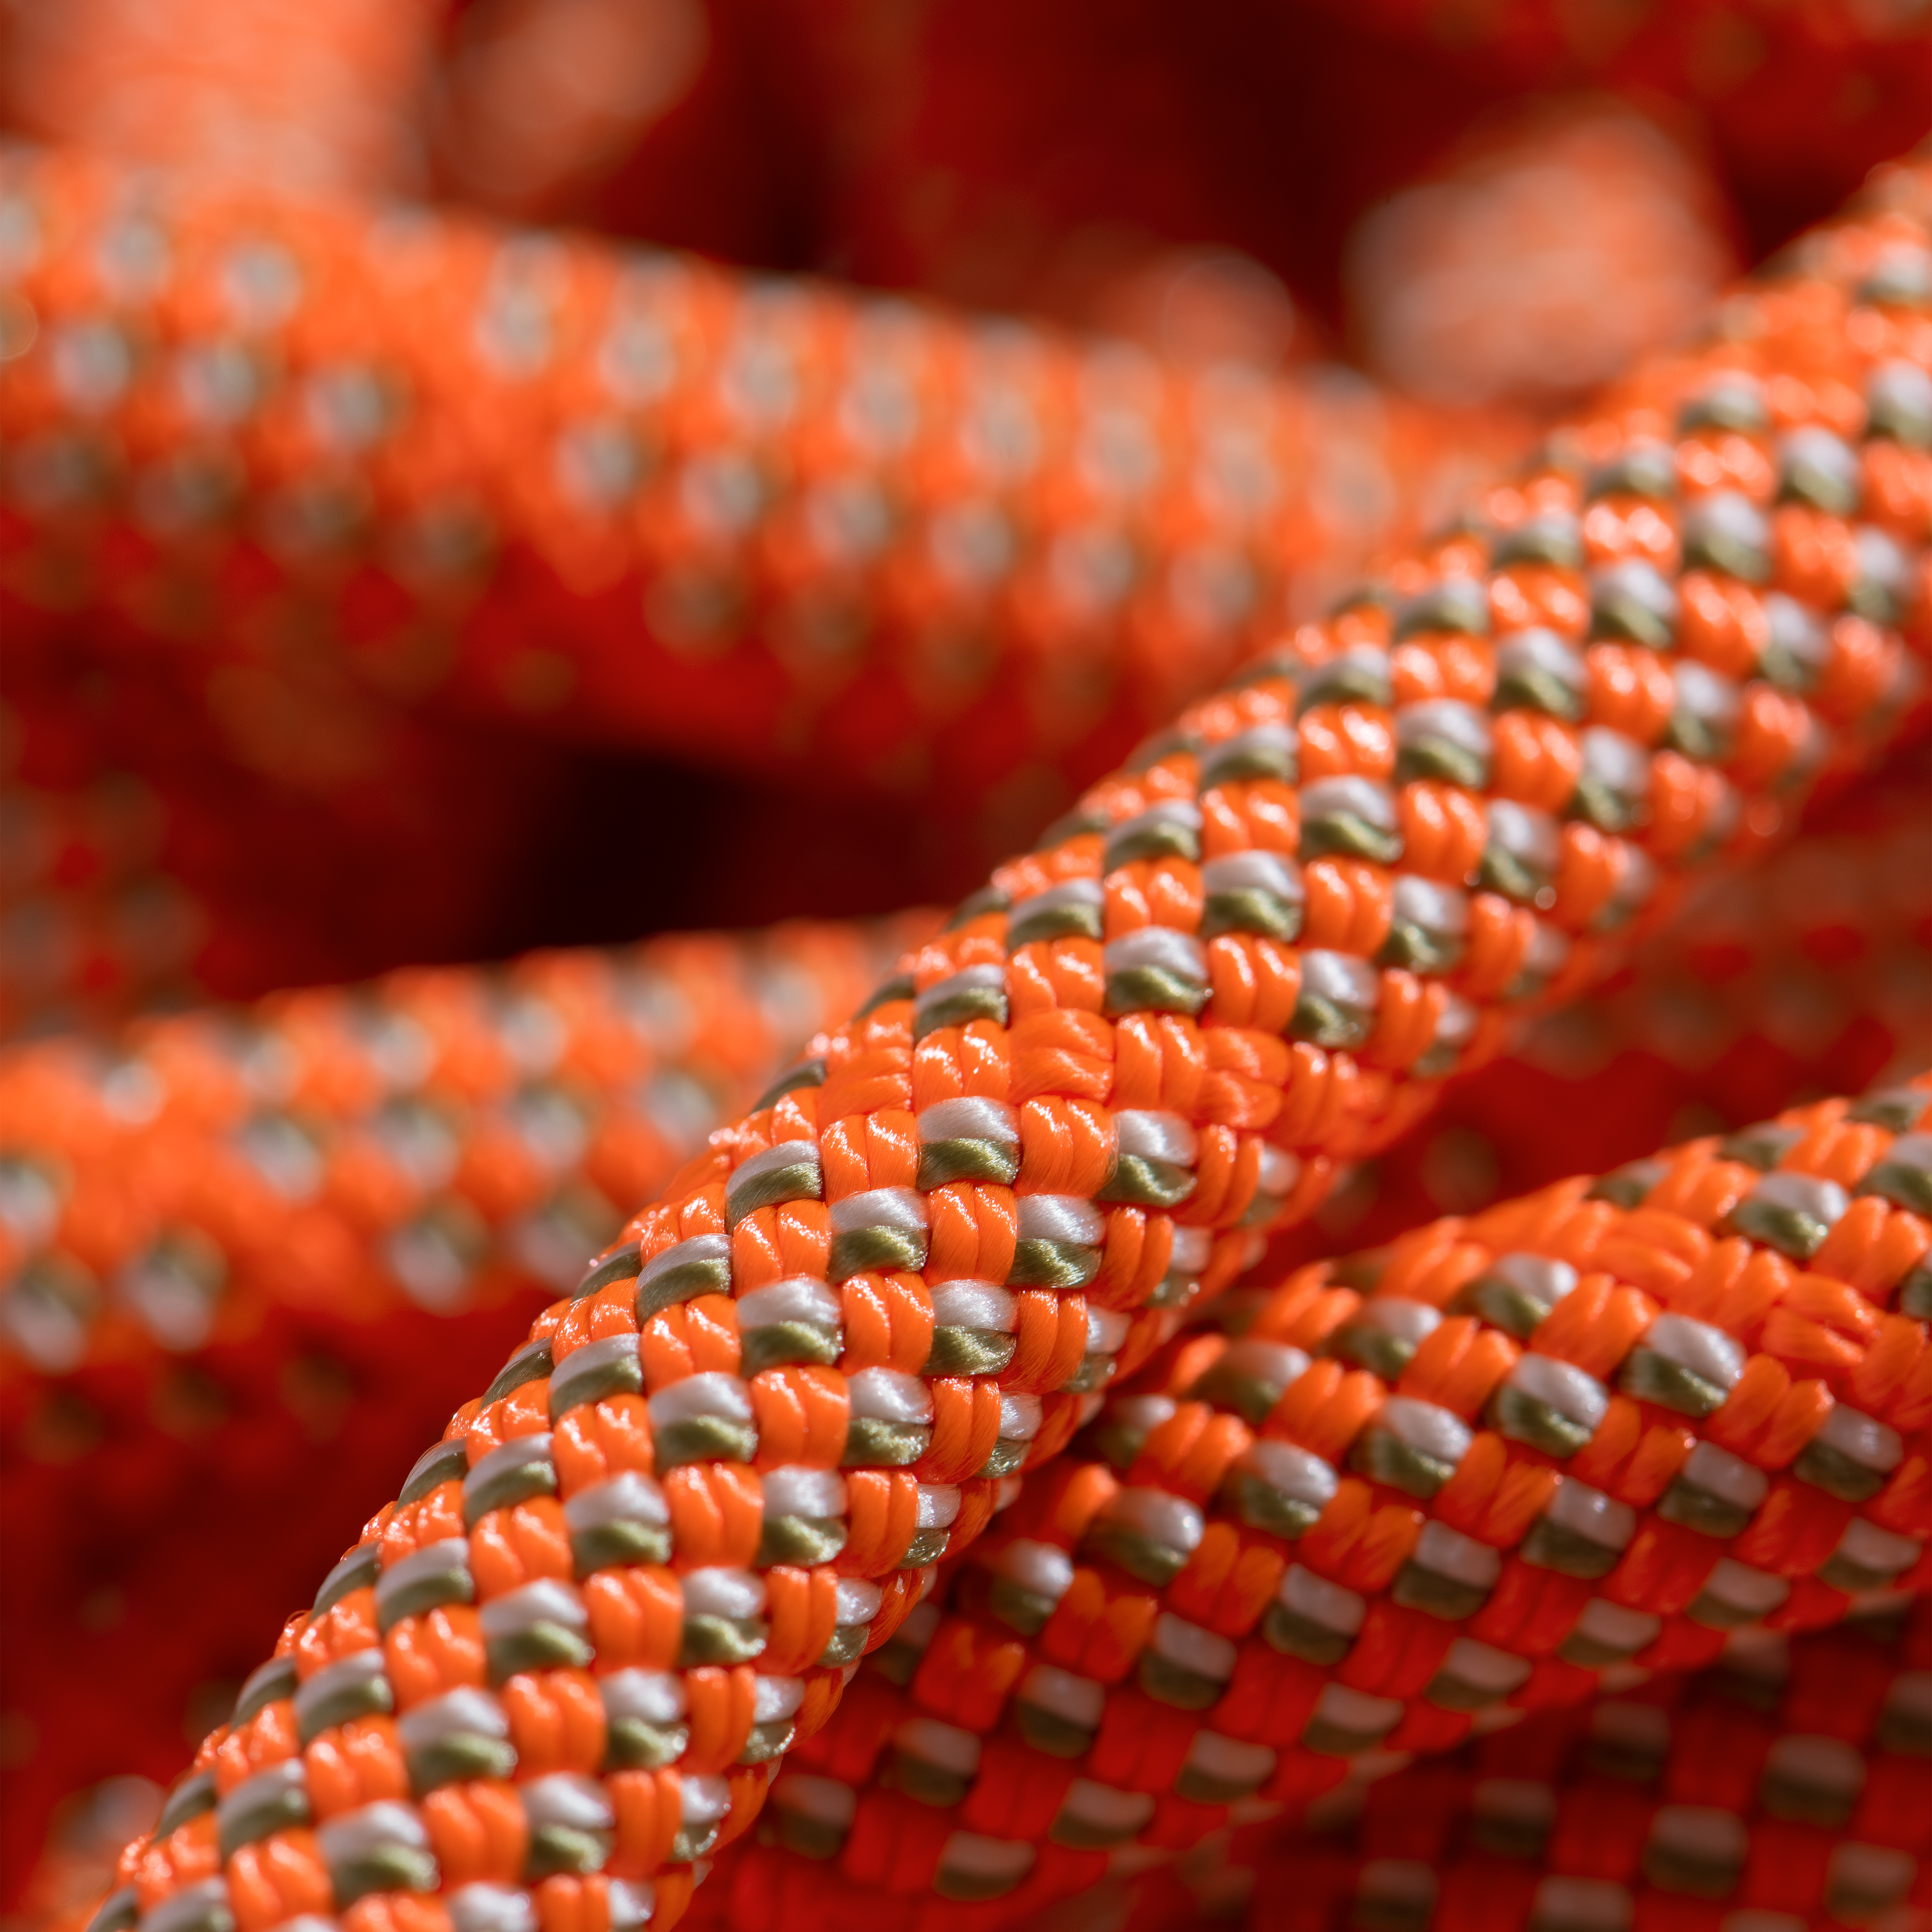 9.8 Crag Classic Rope product image